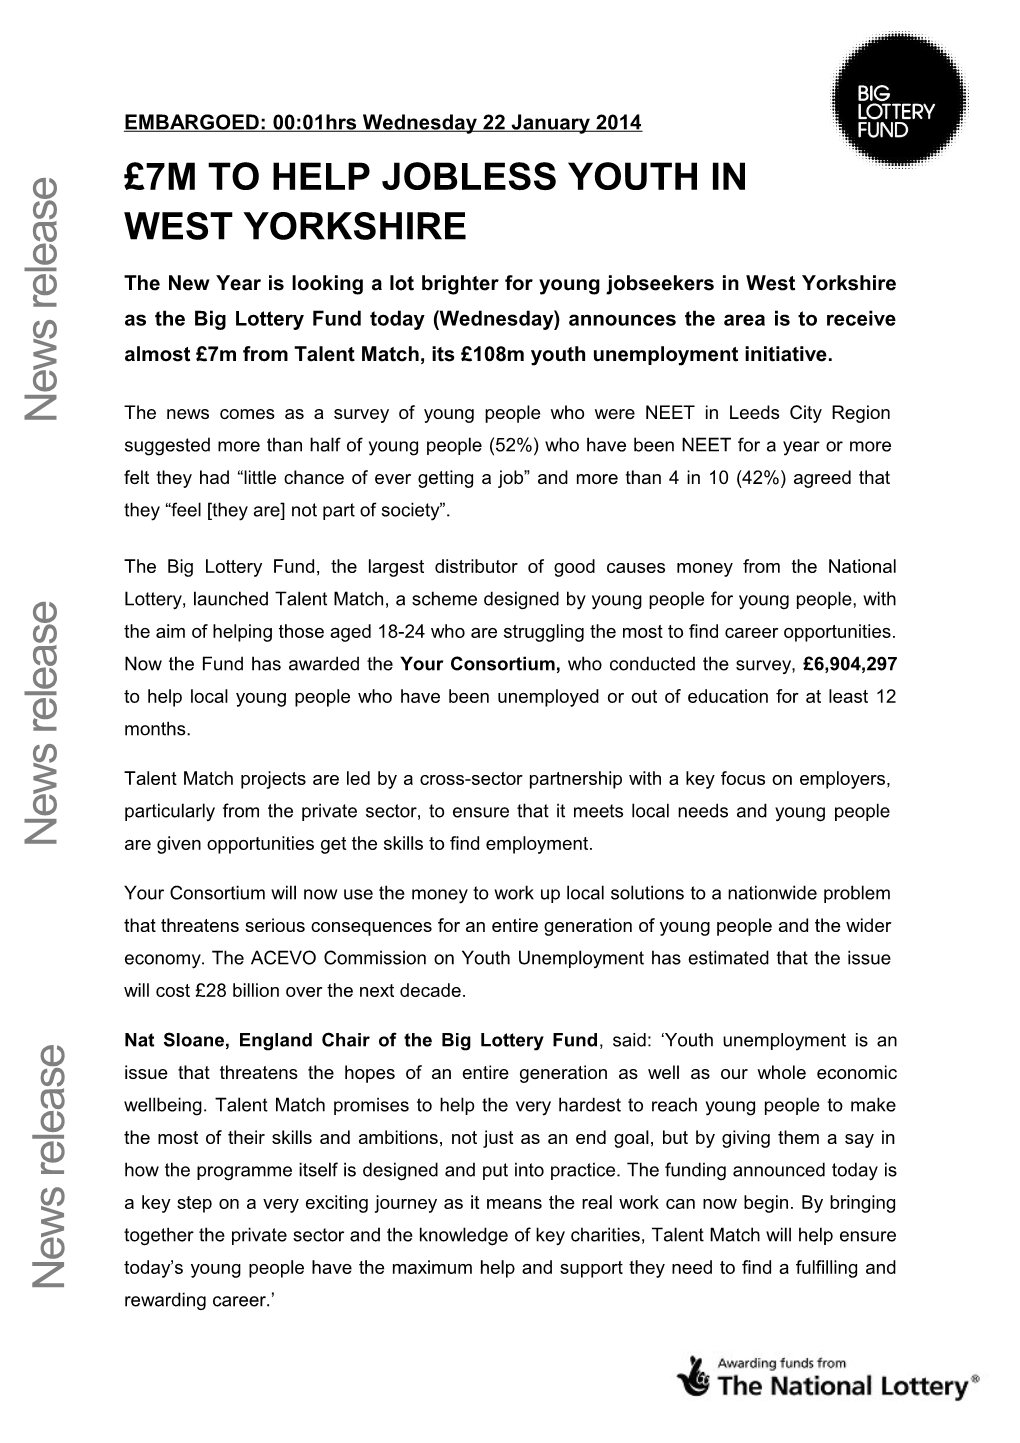 7M to Help Jobless Youth in West Yorkshire